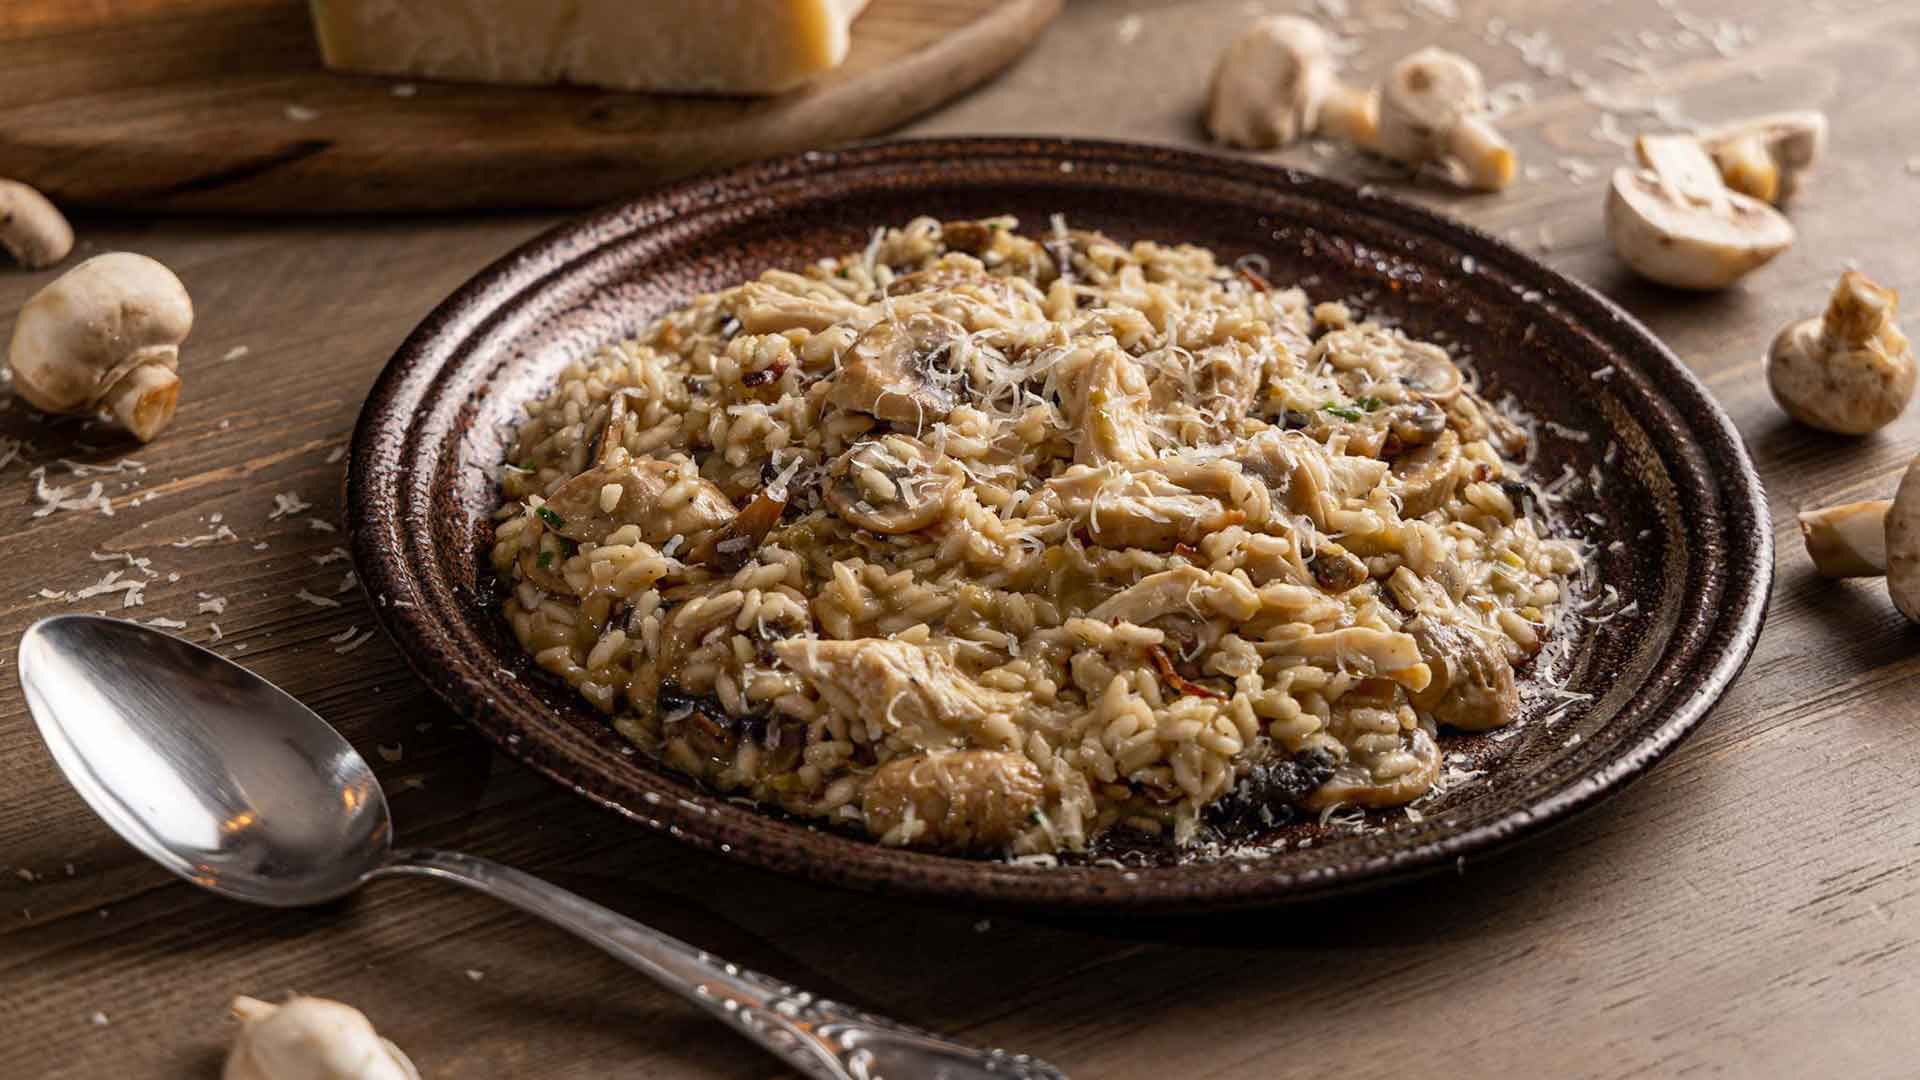 ROTD: Mushroom and Chicken Risotto